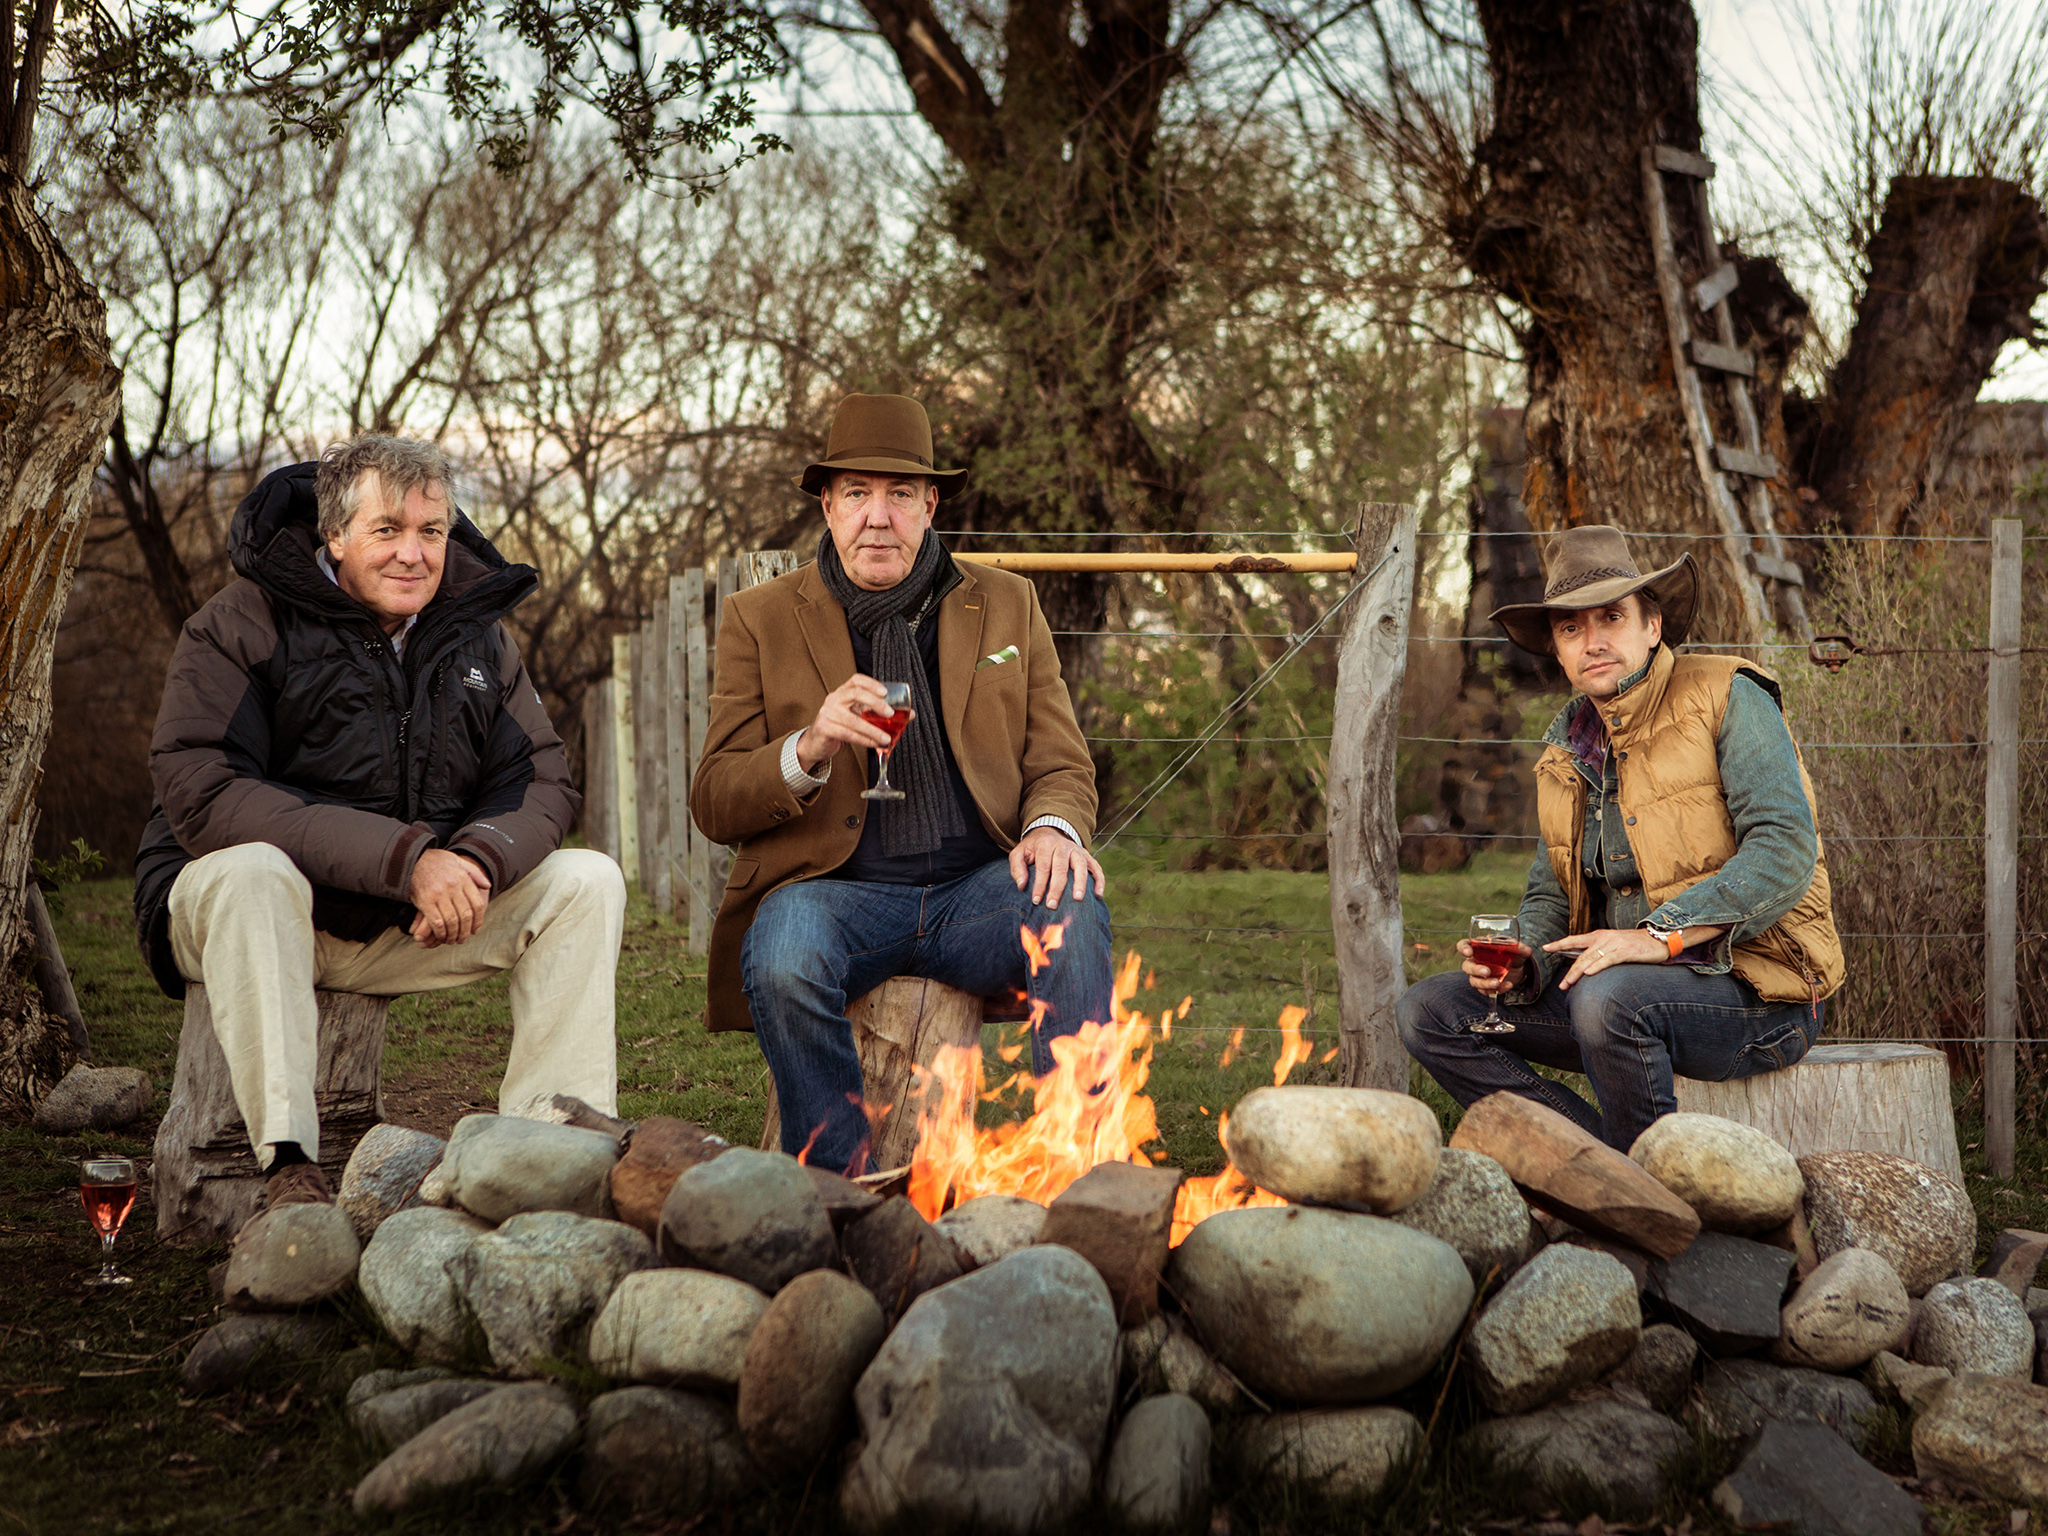 WARNING: Embargoed for publication until: 25/11/2014 - Programme Name: Top Gear - TX: n/a - Episode: Christmas (No. 1) - Picture Shows: Christmas 2014 James May, Jeremy Clarkson, Richard Hammond - (C) BBC - Photographer: Rod Fountain